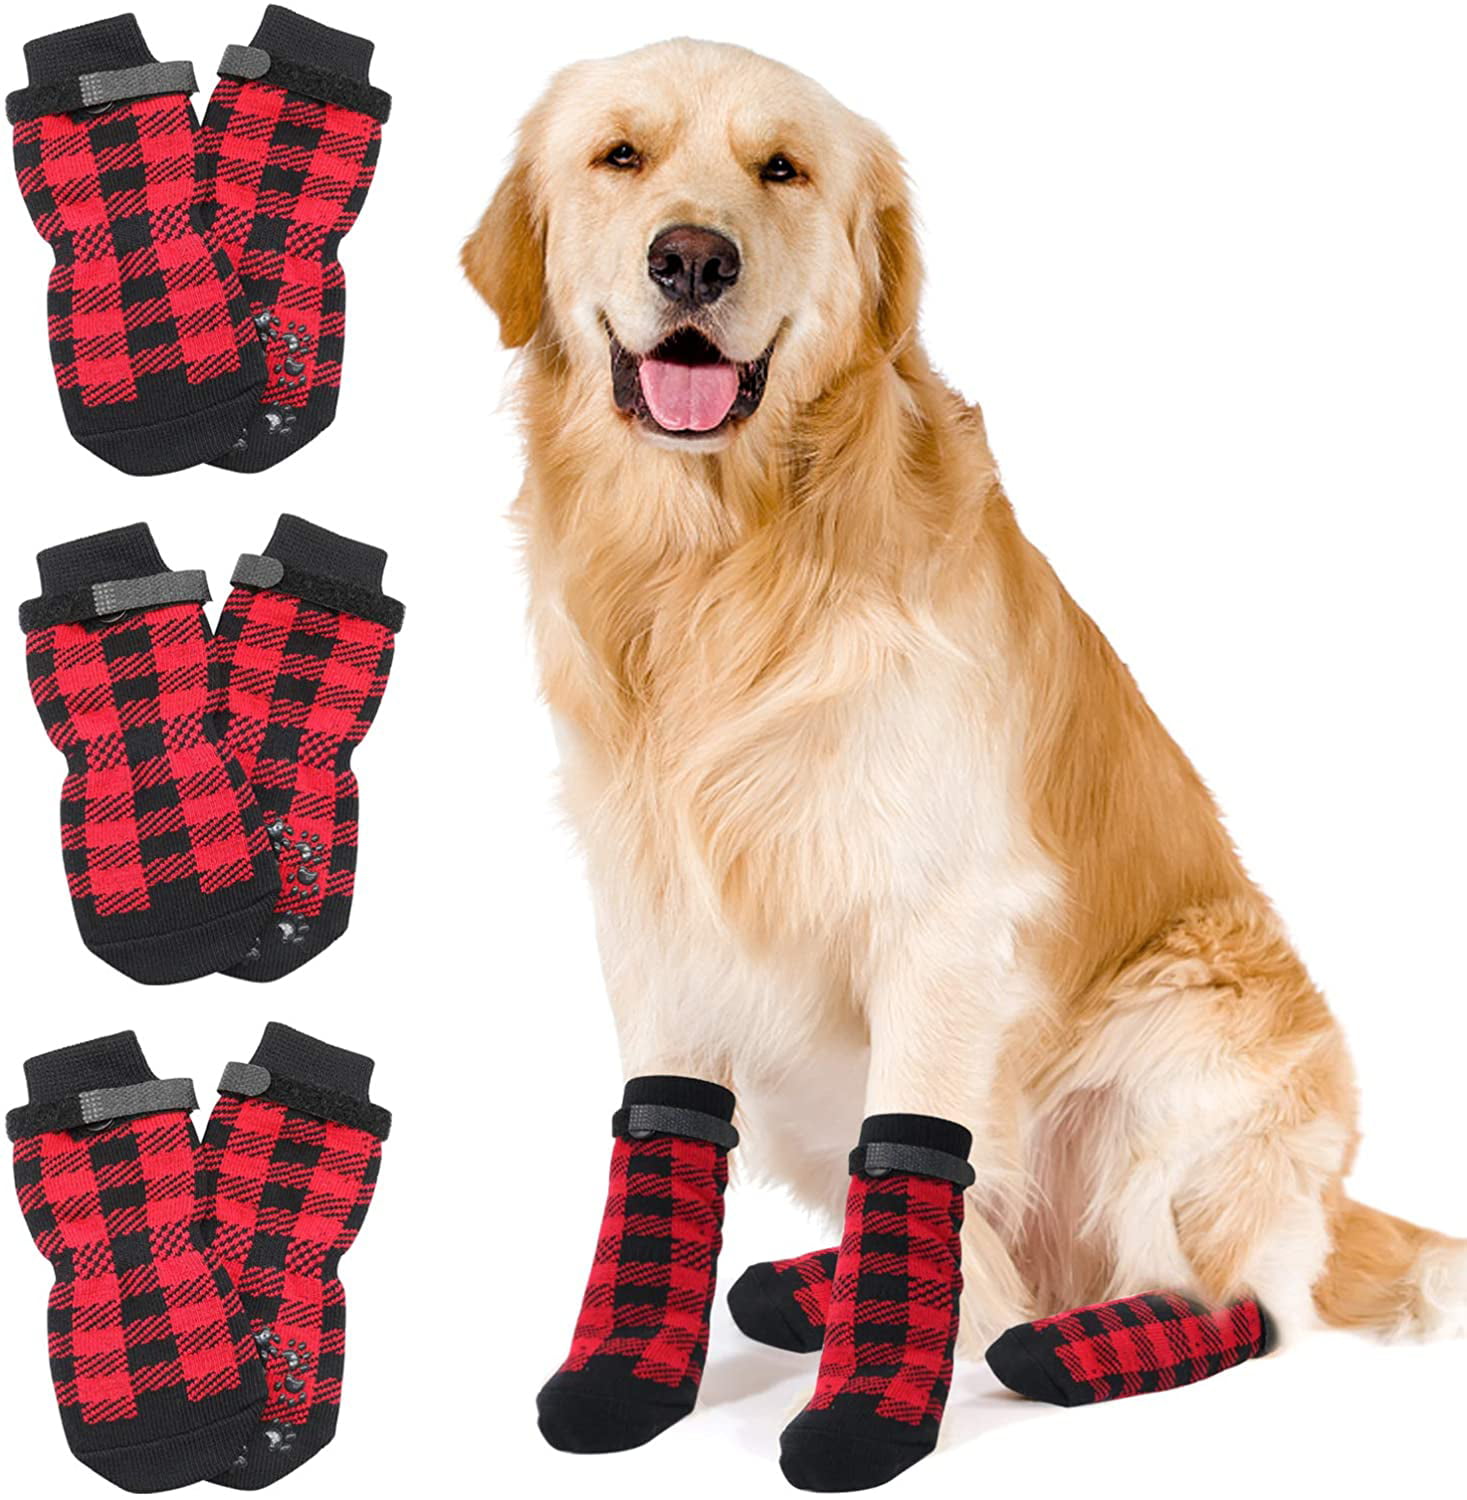 URBEST Dog Socks 4 Pcs Dog Shoes for Dogs Cat Socks Non-Slip Soles Adjustable Dog Cat Paw Socks for Puppy and Small Dogs 